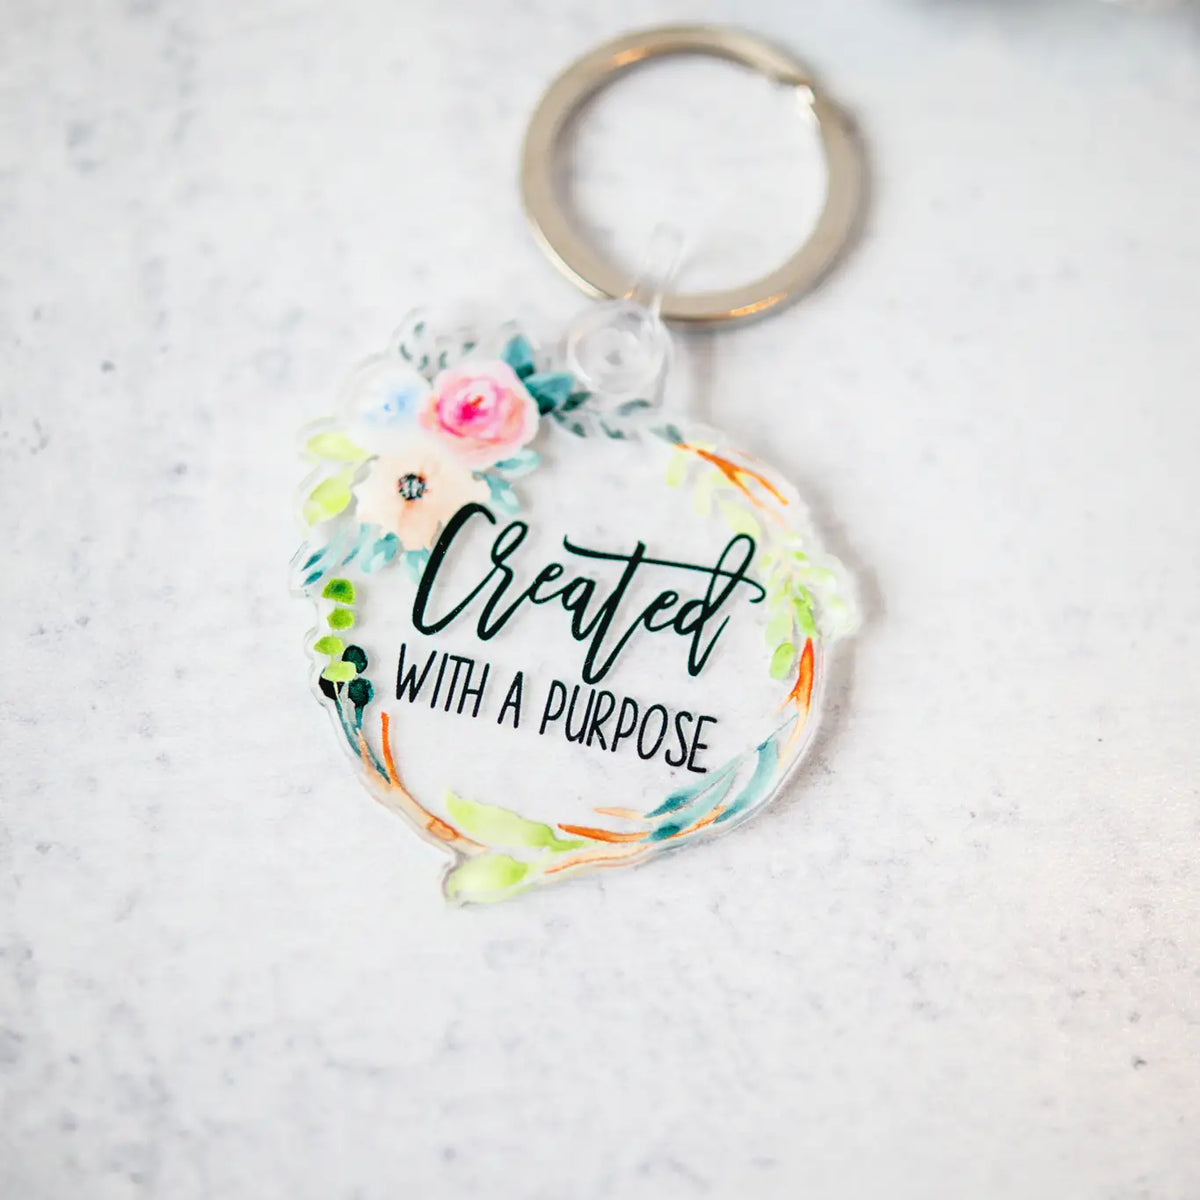 Created with A Purpose, Floral Keychain